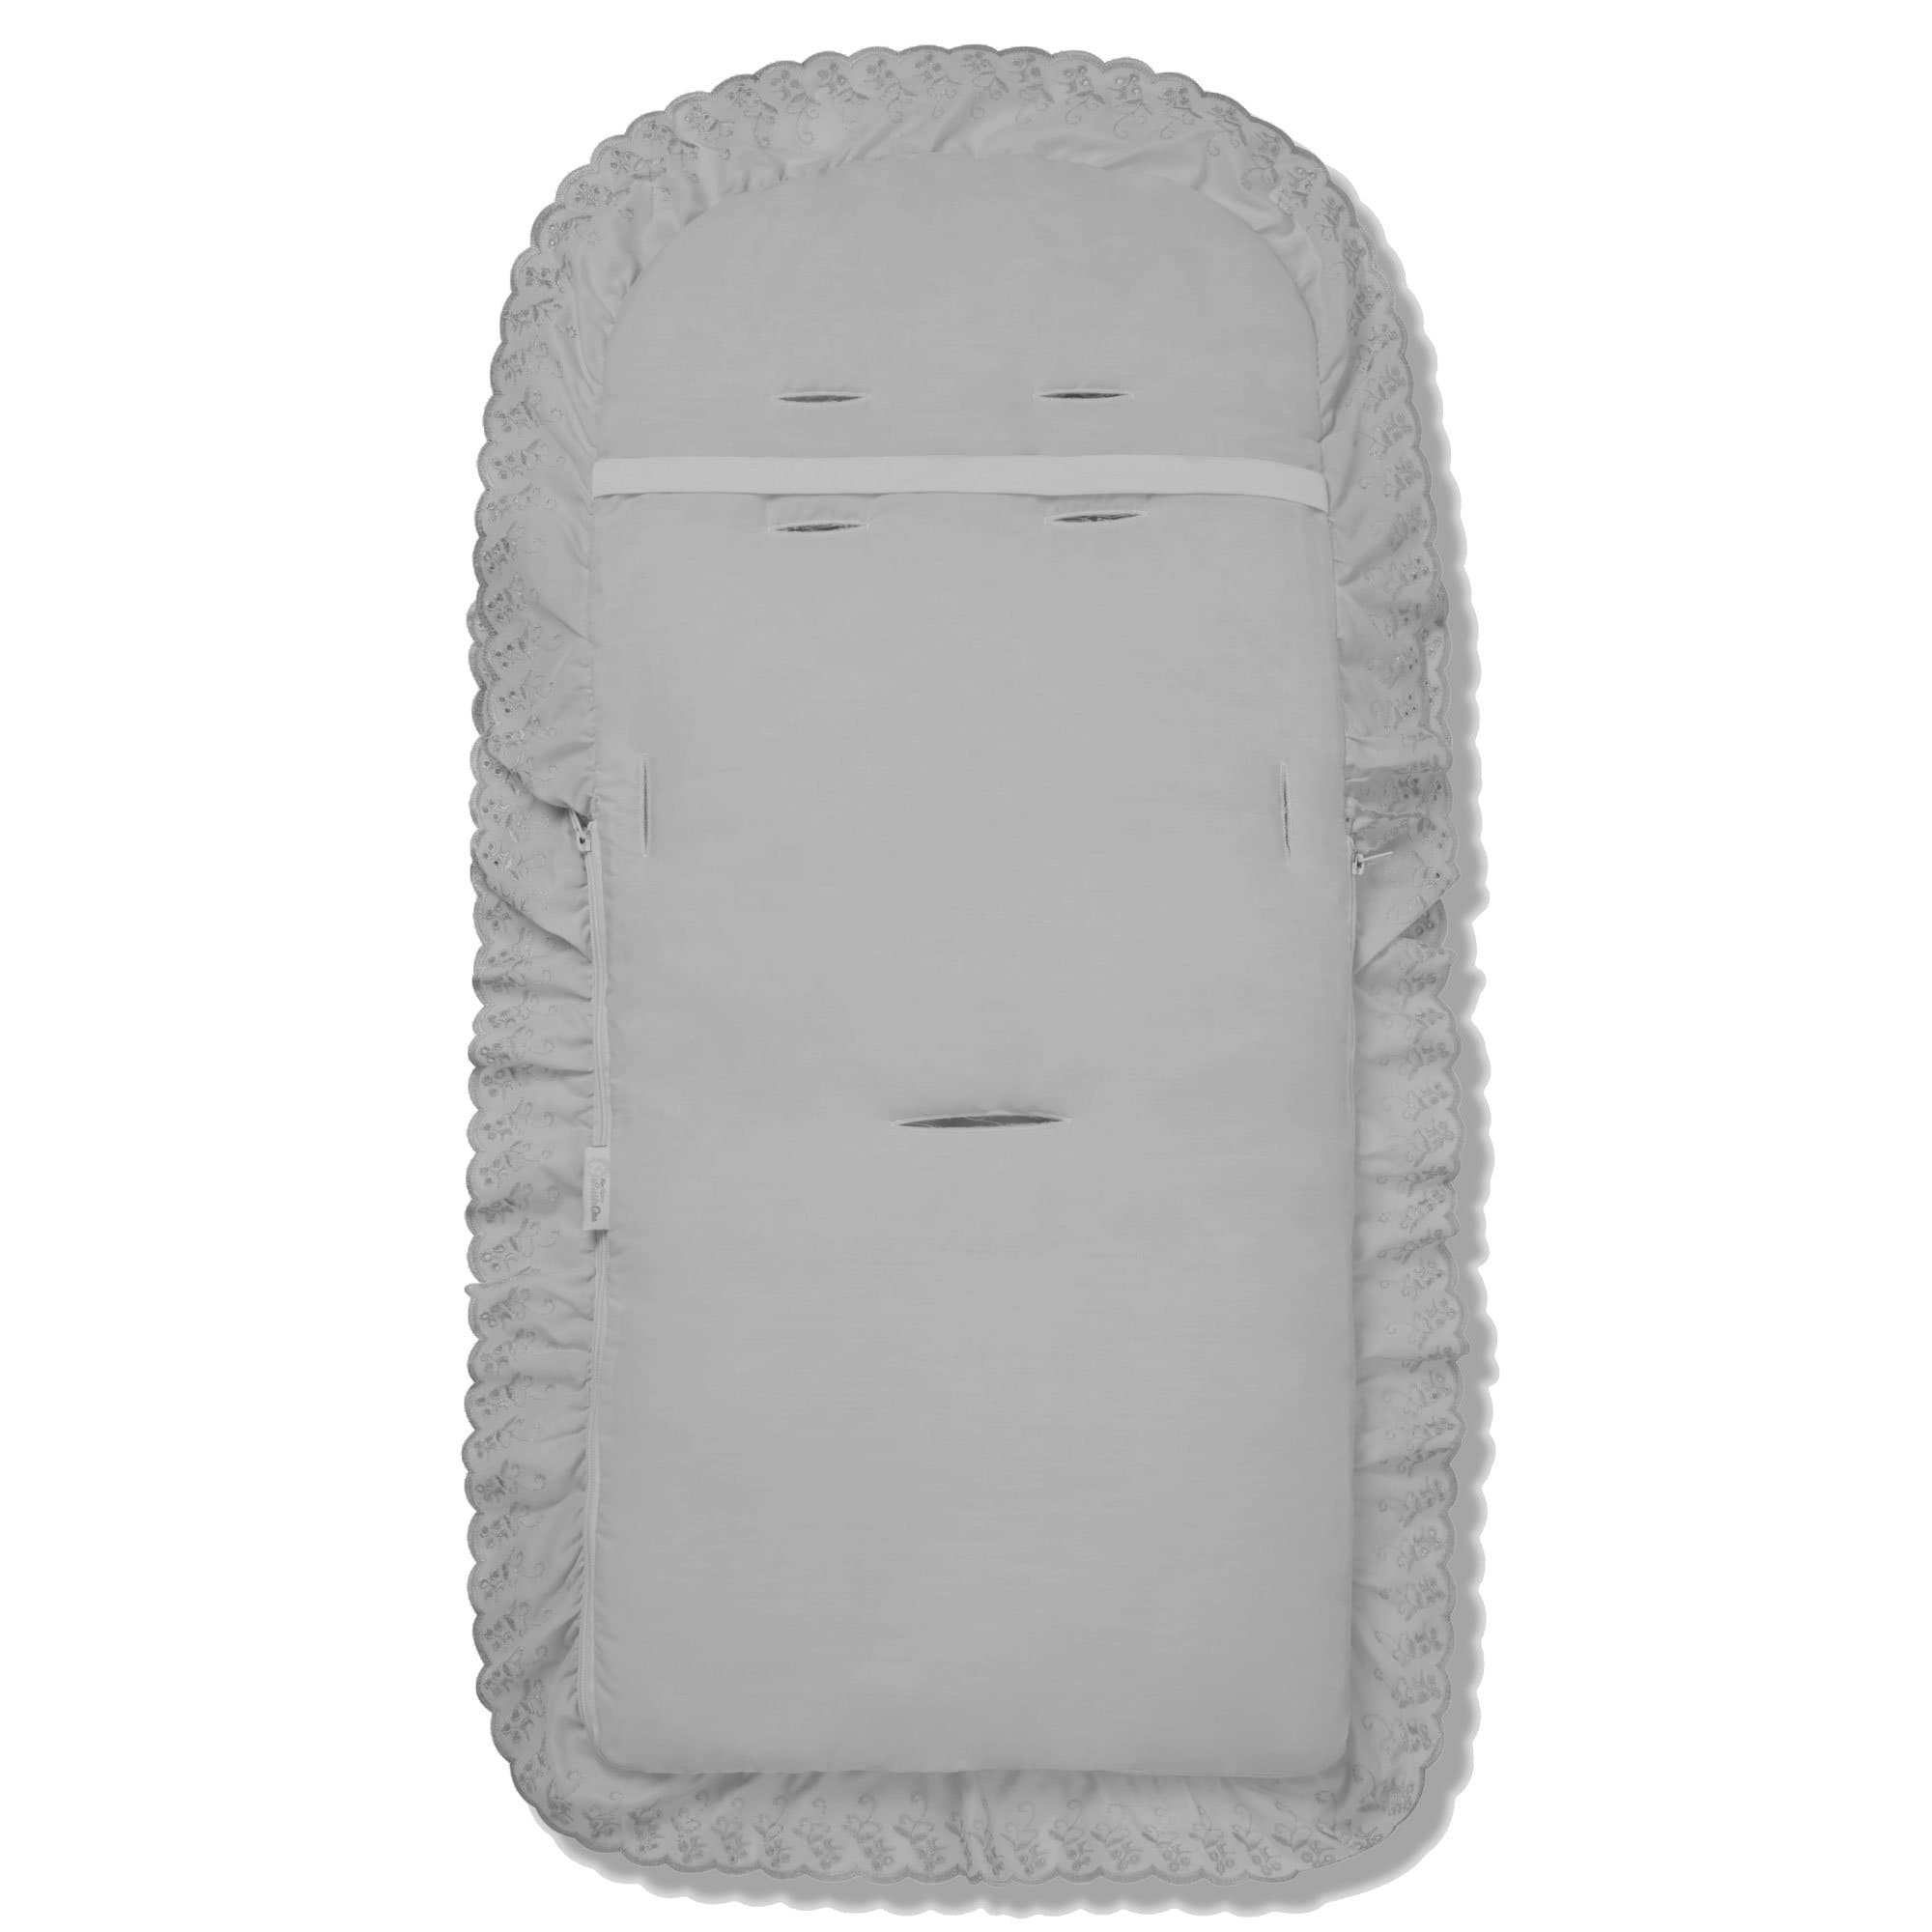 Broderie Anglaise Footmuff / Cosy Toes Compatible with Babybus -  | For Your Little One